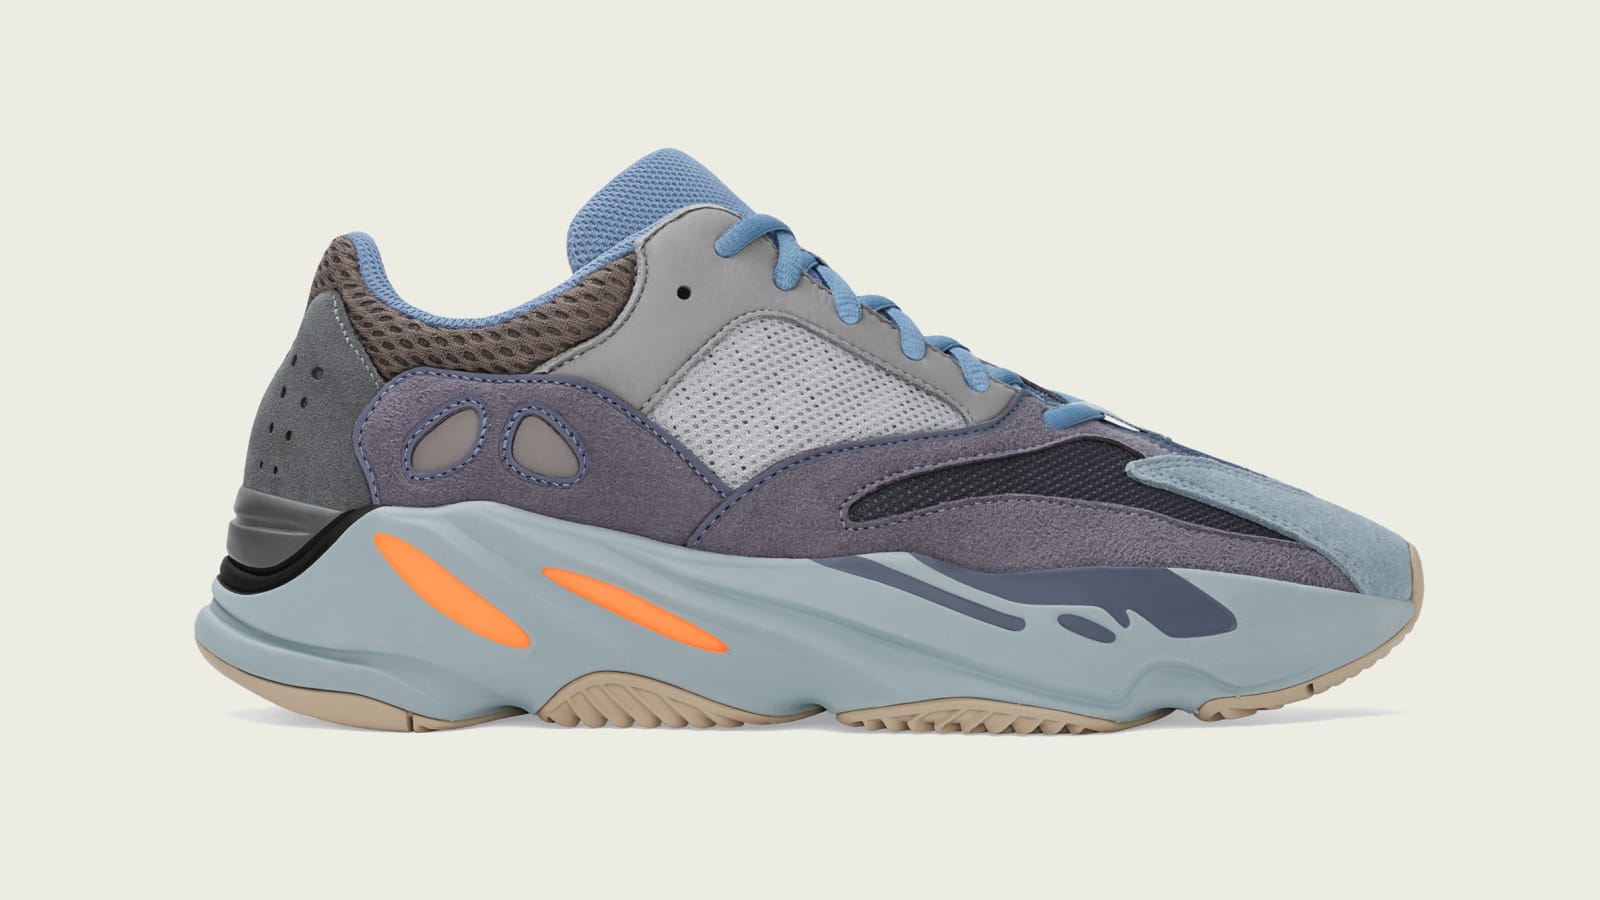 Adidas Yeezy Boost 700 &quot;Carbon Blue&quot; Release Date Revealed: Photos